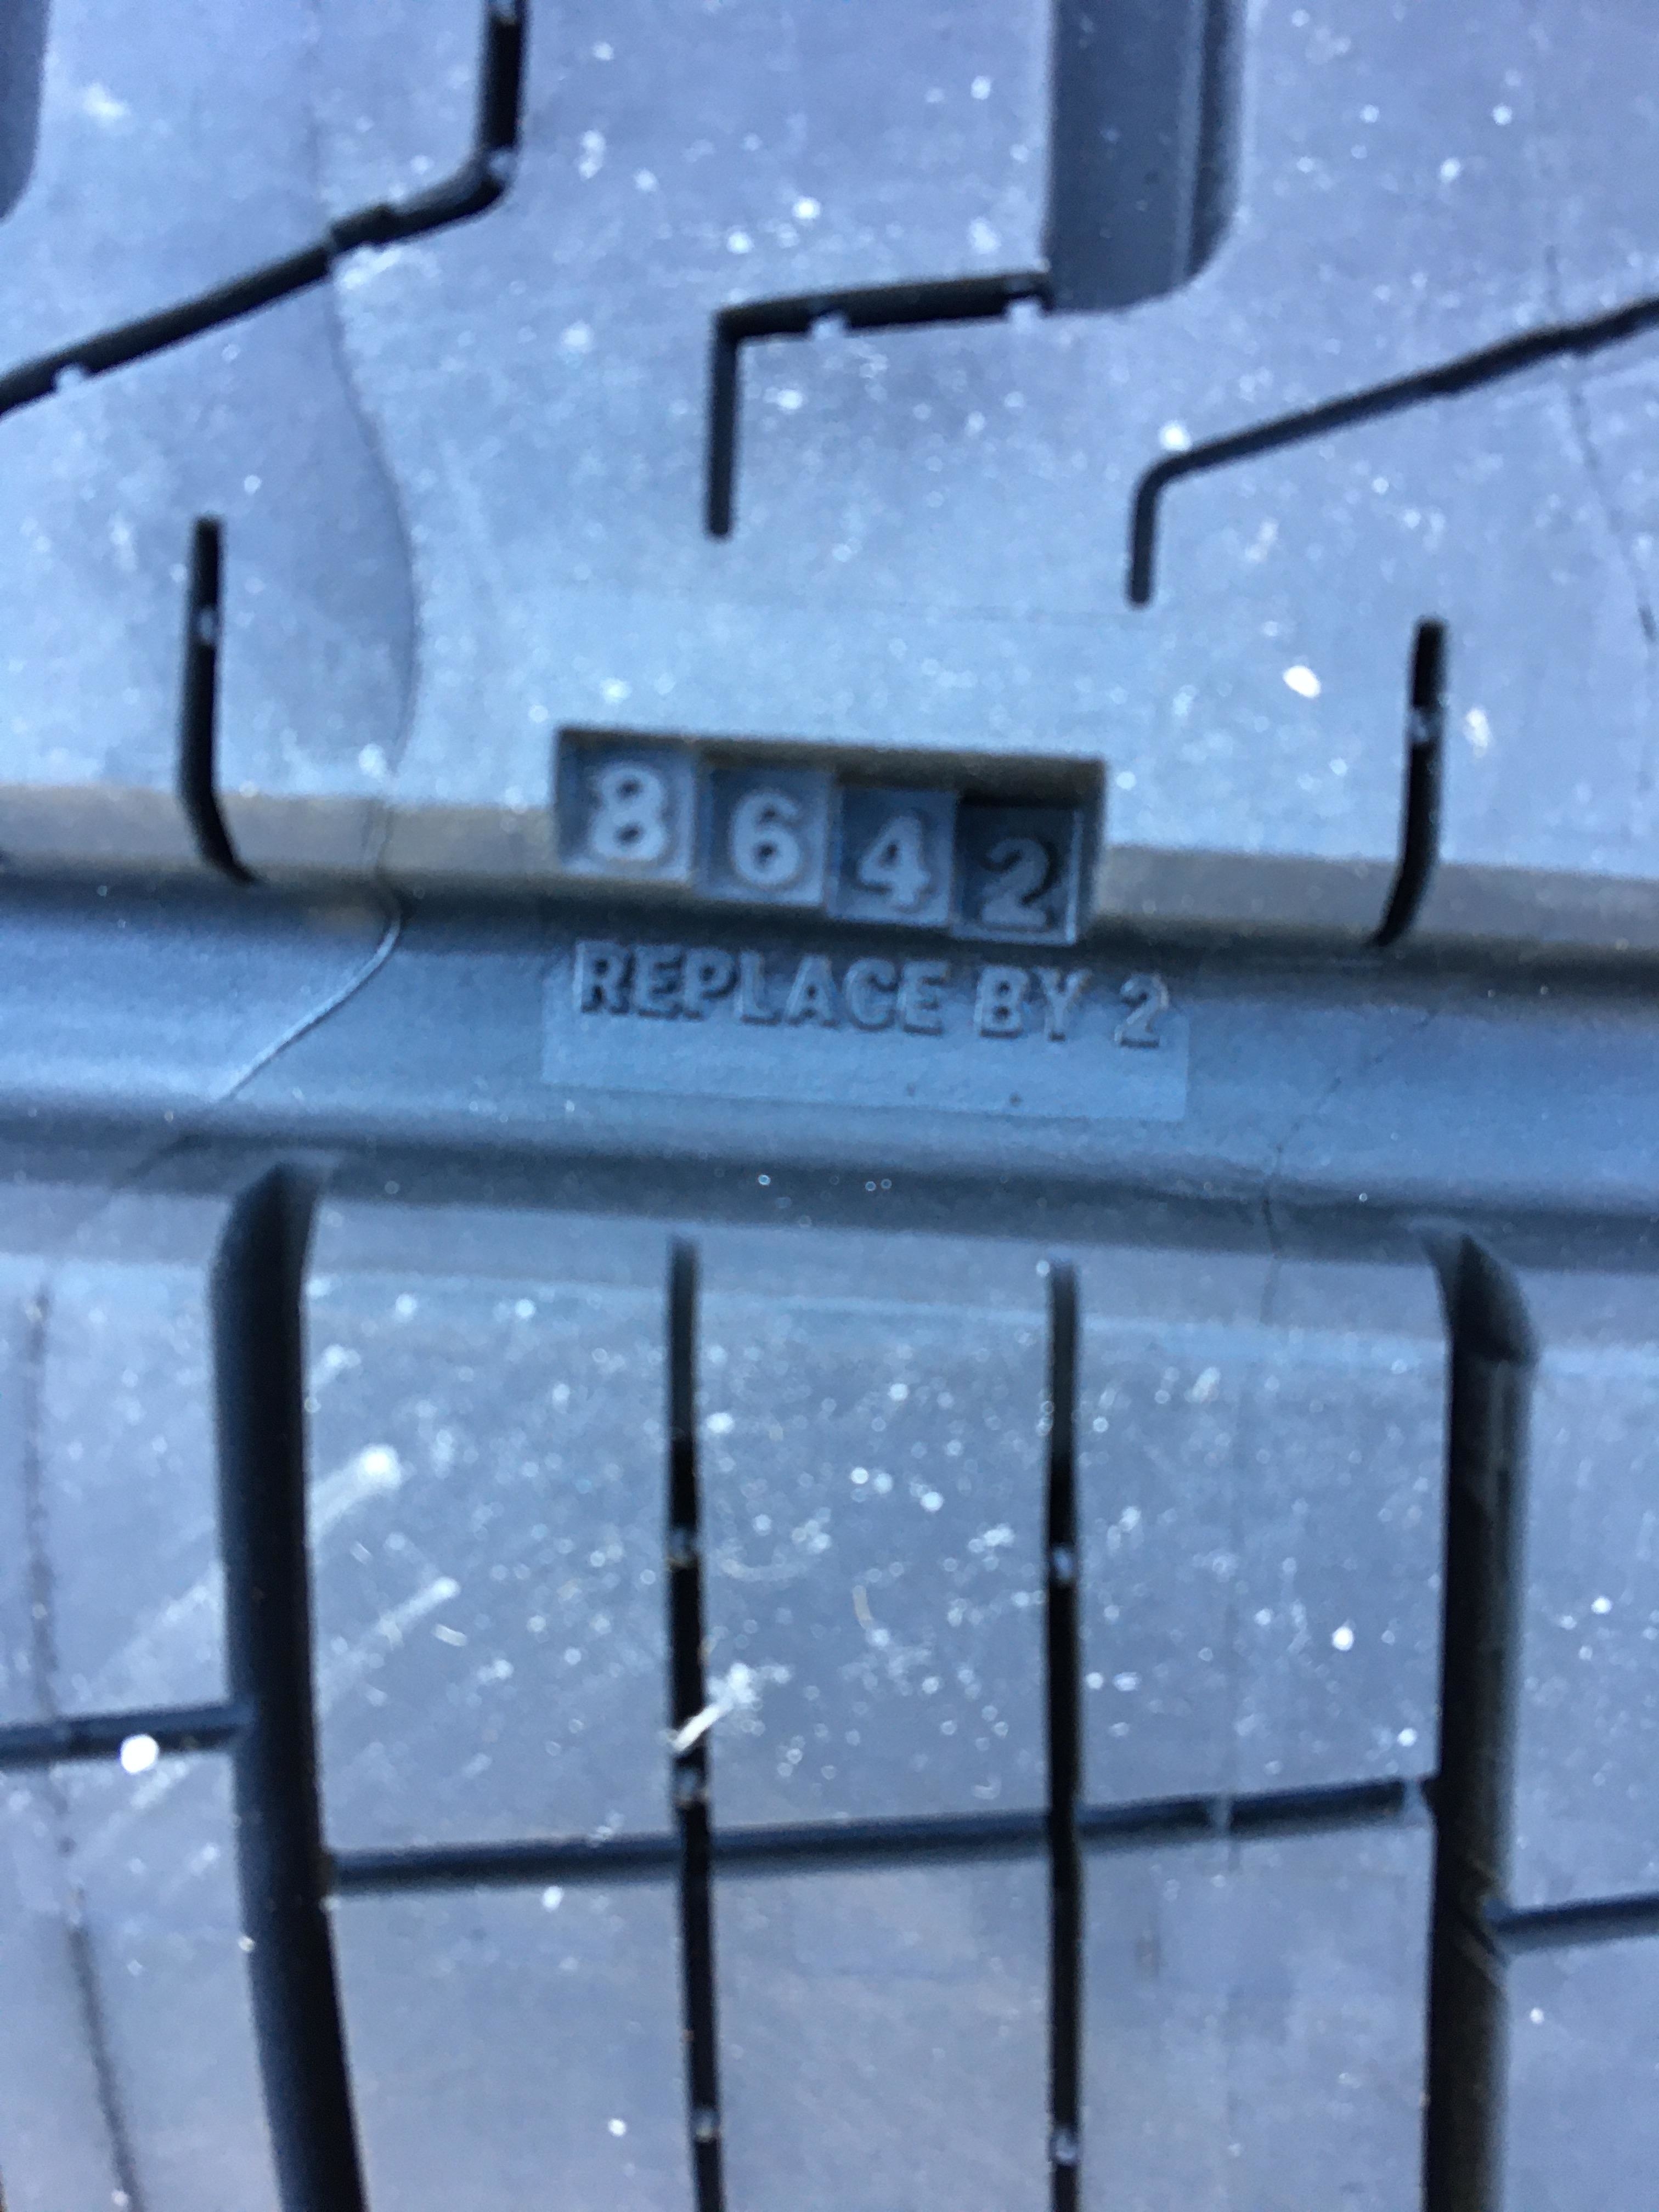 the measurement on the side of the tire